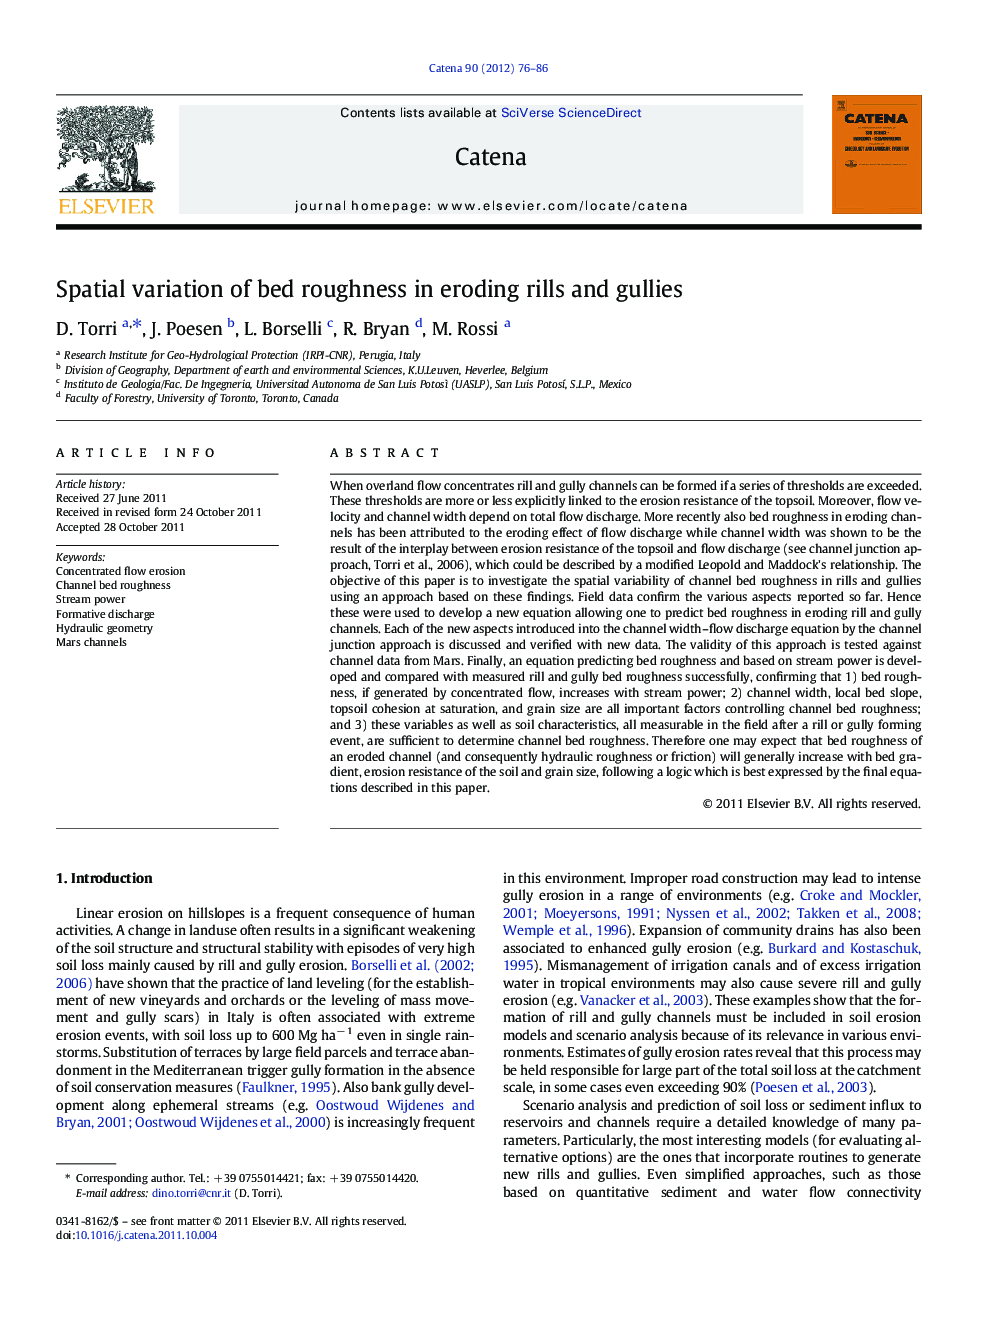 Spatial variation of bed roughness in eroding rills and gullies